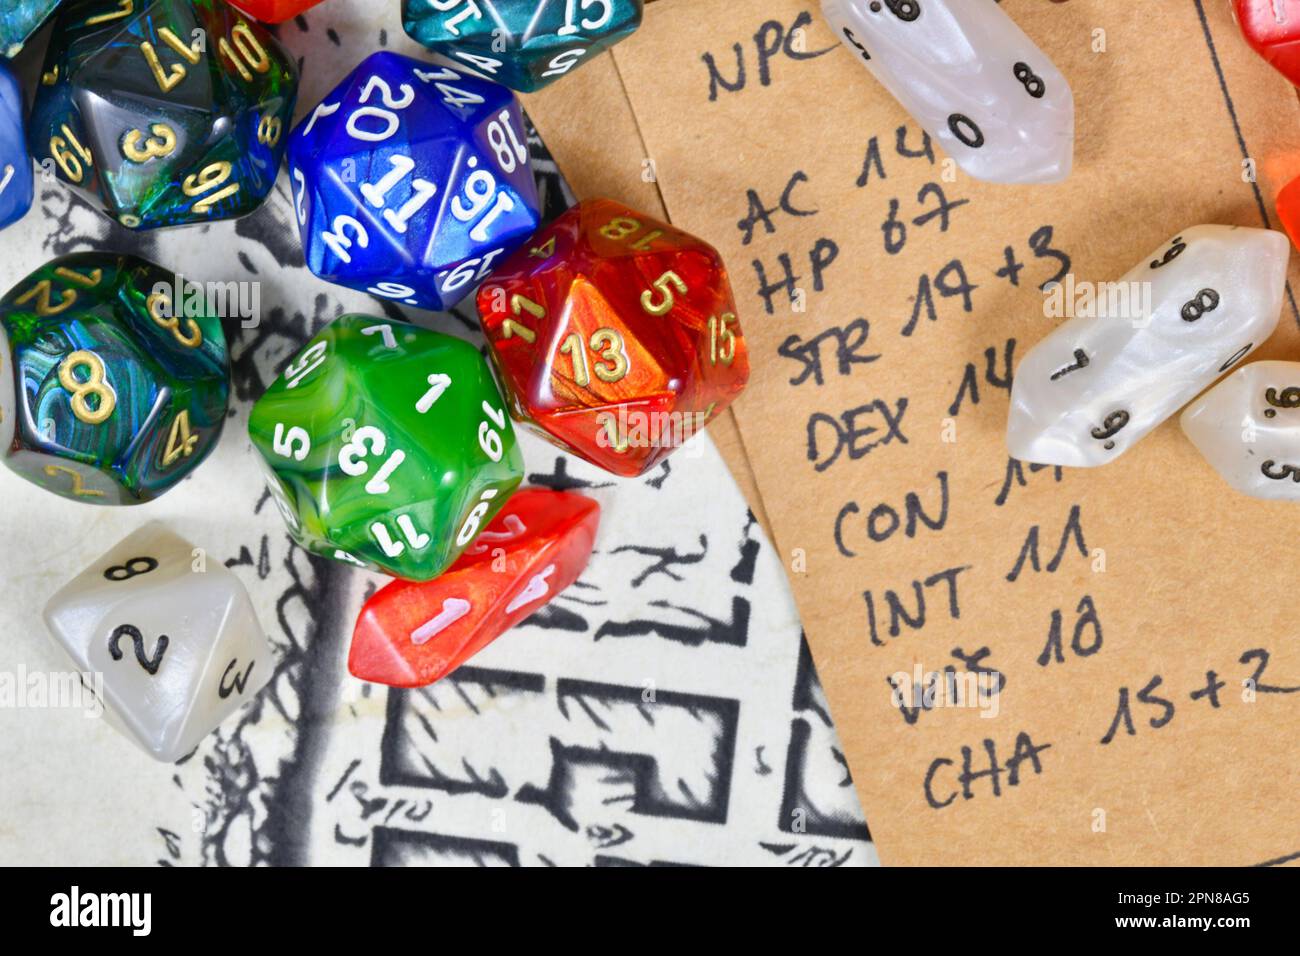 Colorful tabletop role playing RPG game dices Stock Photo